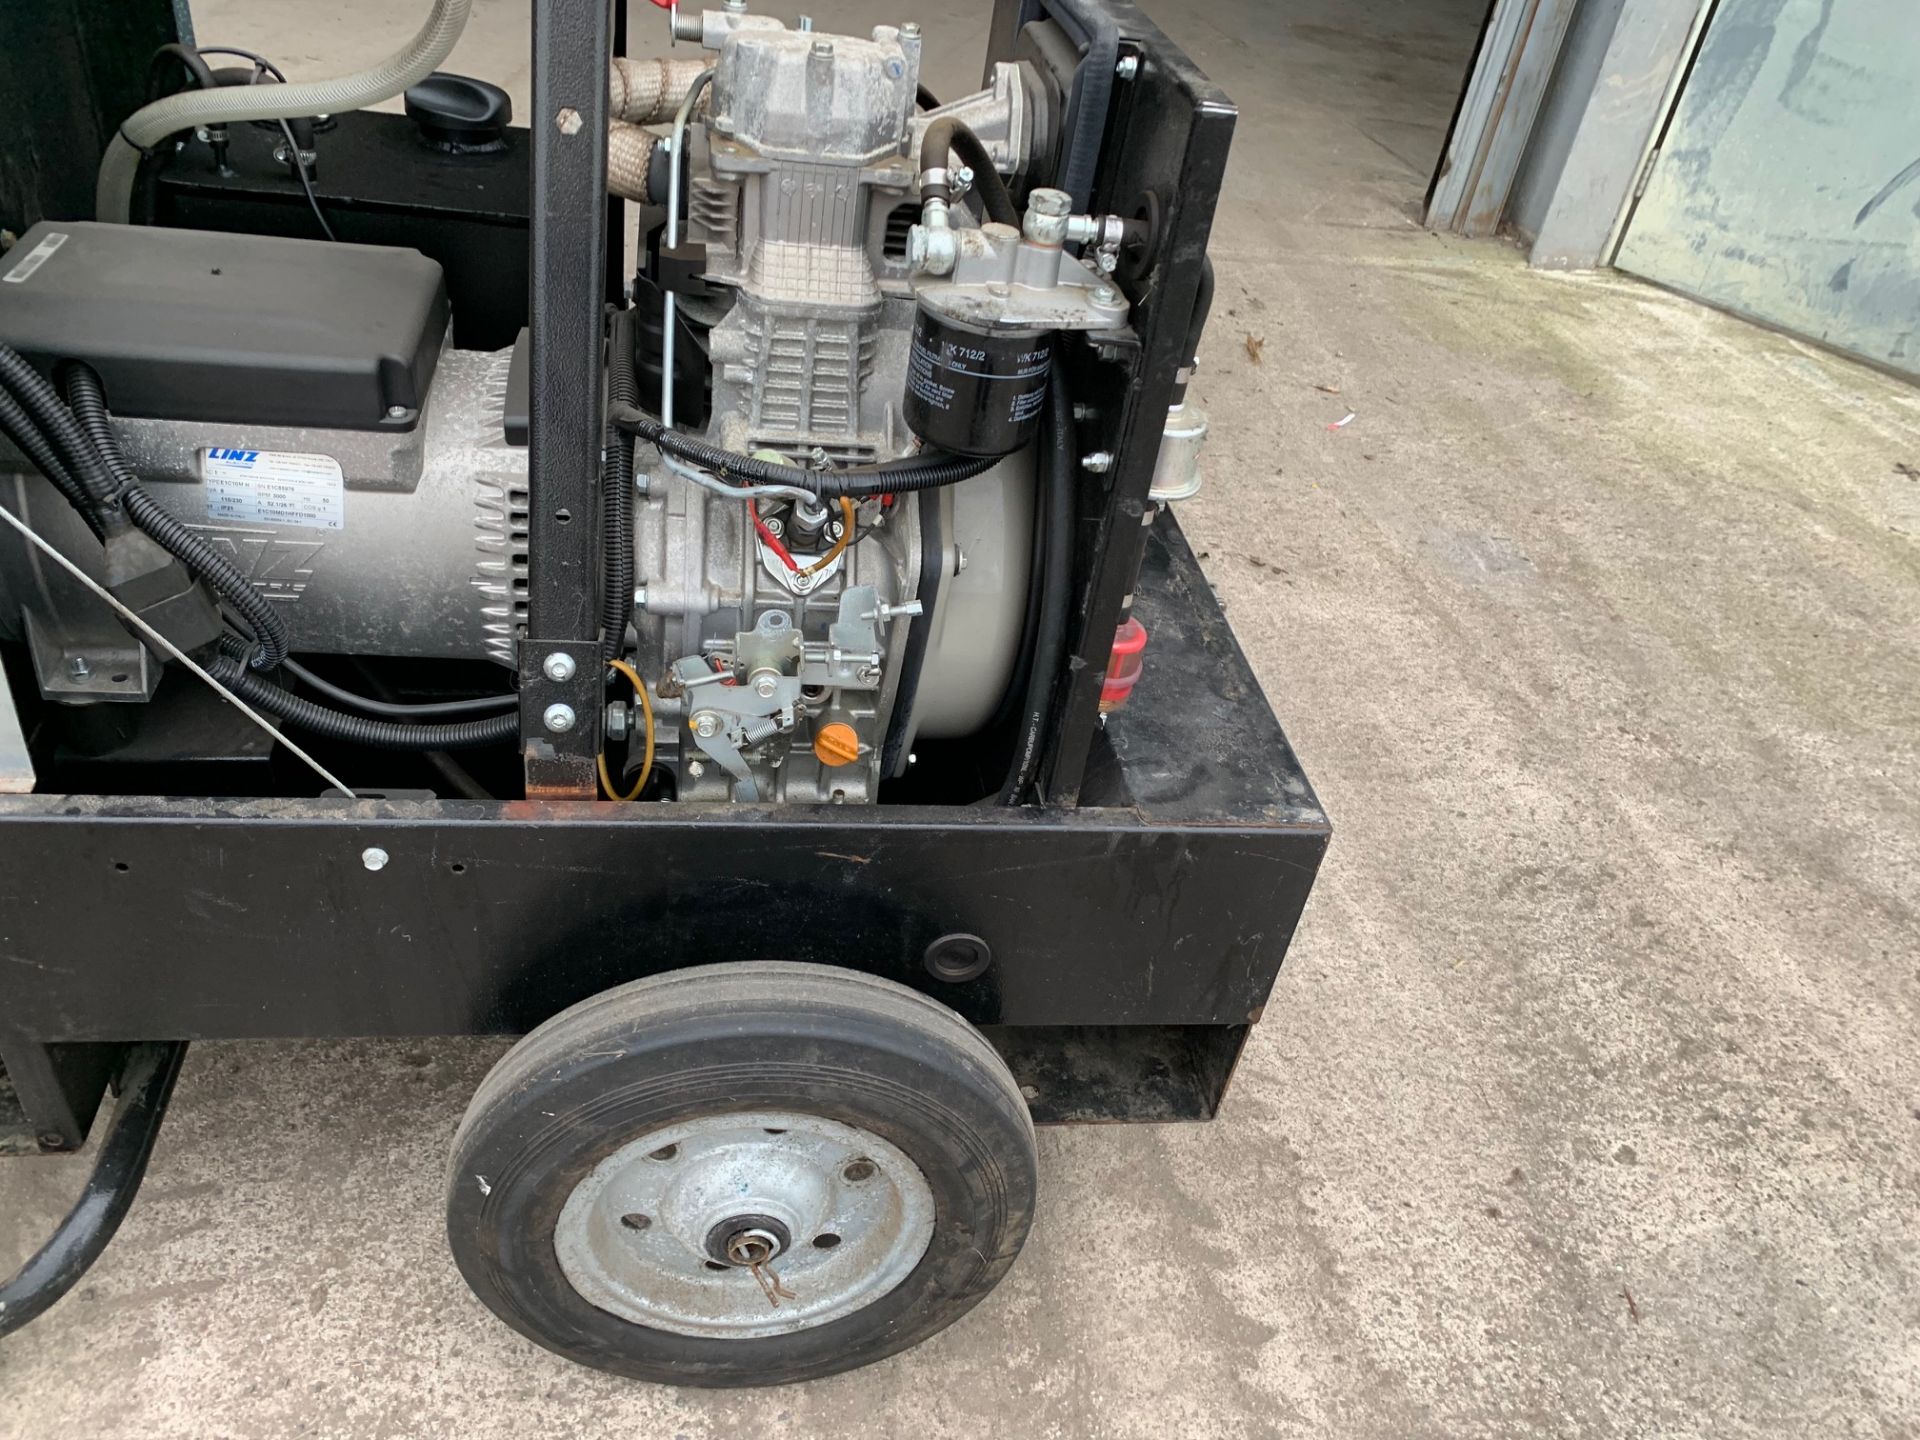 MGTP 6000 SS-Y GENERATOR, 6KvA DIESEL SINGLE PHASE 110/230v WITH 100L YANMAR ENGINE, 169 HOURS - Image 6 of 8